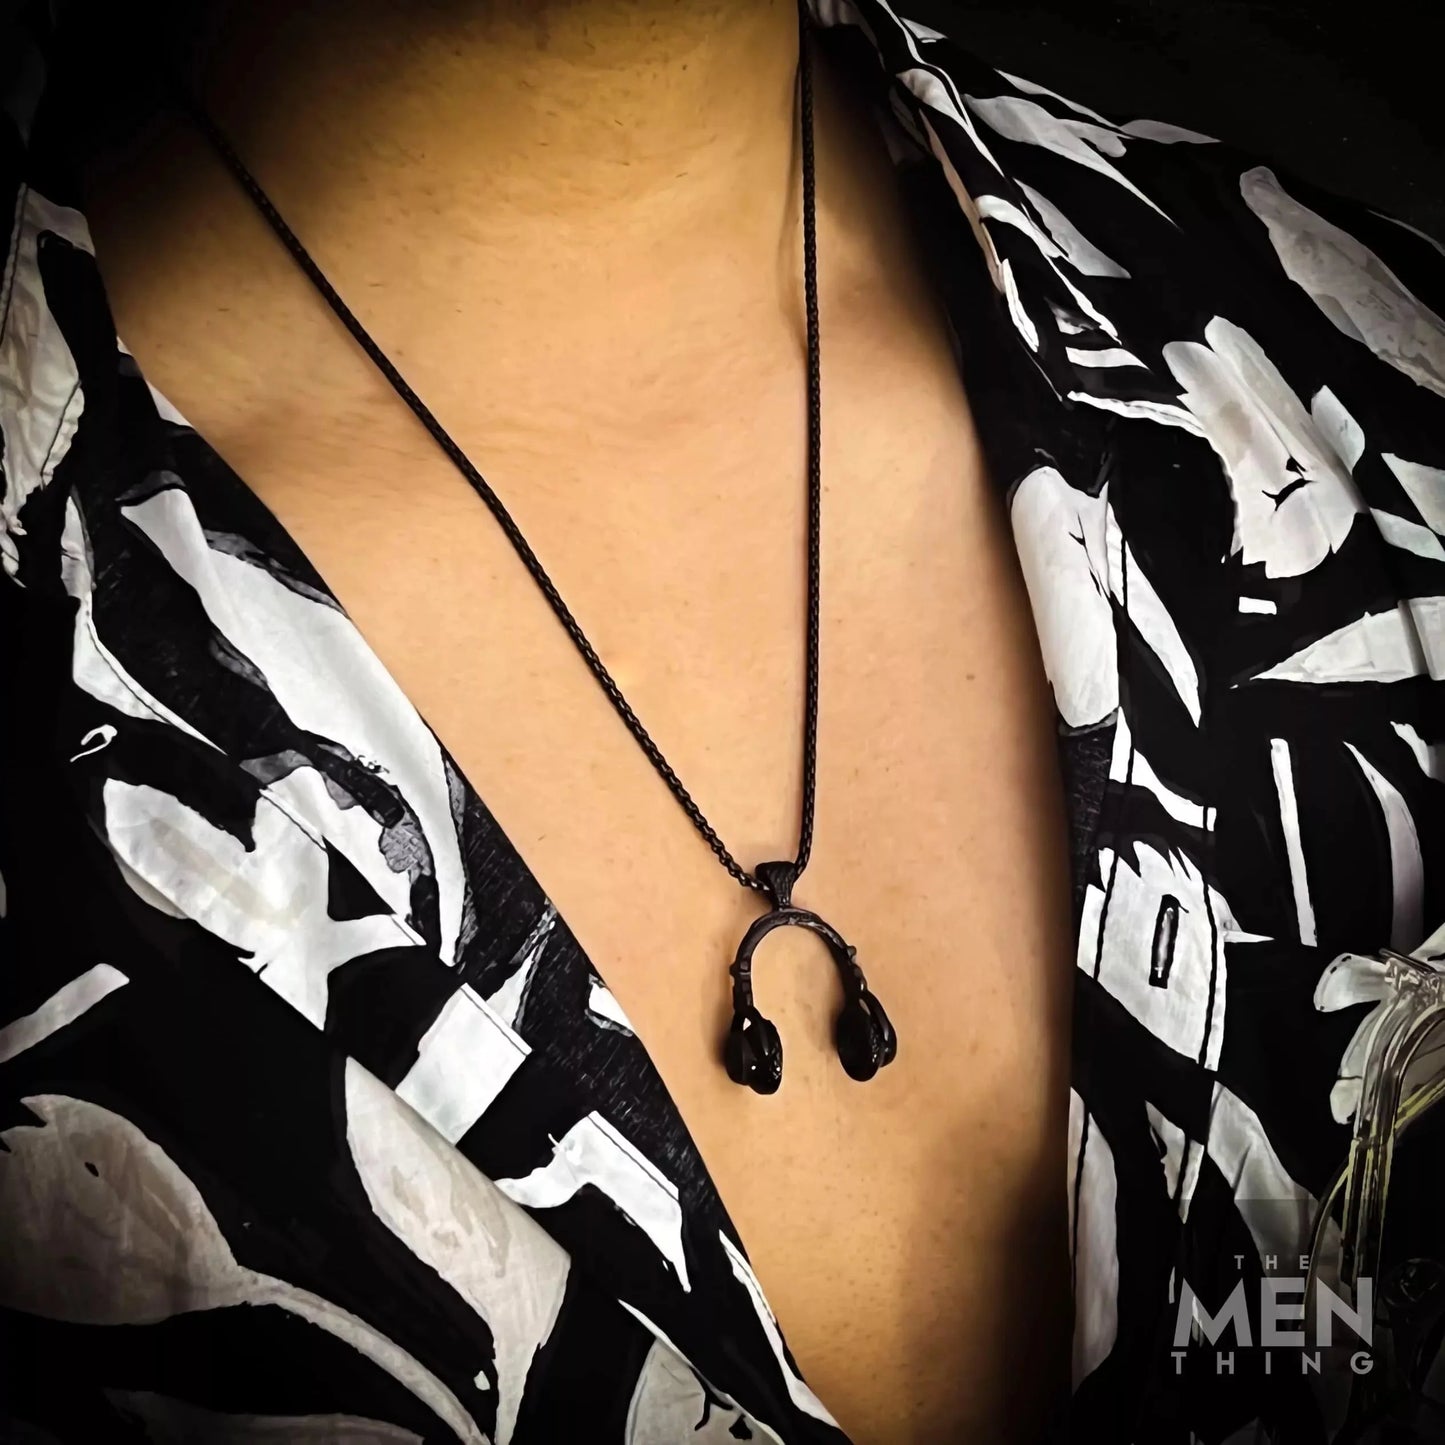 THE MEN THING Pendant for Men - Pure Titanium Steel Black Music Headphone Pendant with 24inch Round Box Chain for Men & Boys